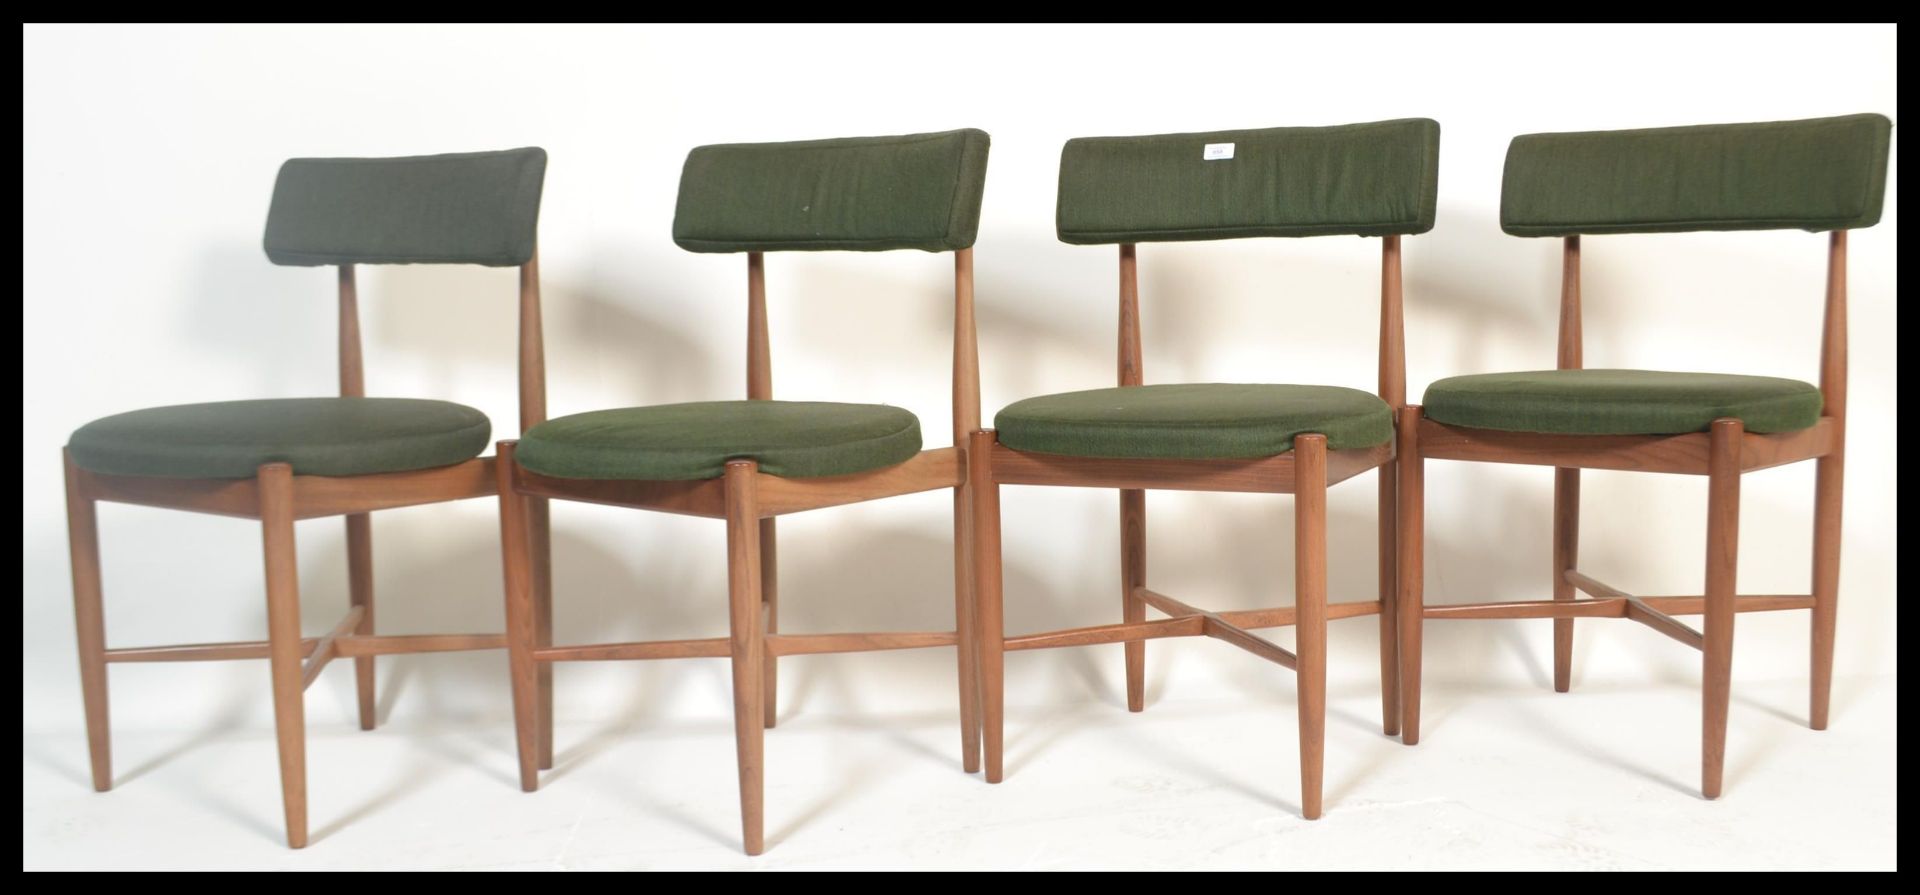 A set of four teak G-plan dining chairs designed by Koford Larsen. Raised on tapered turned legs